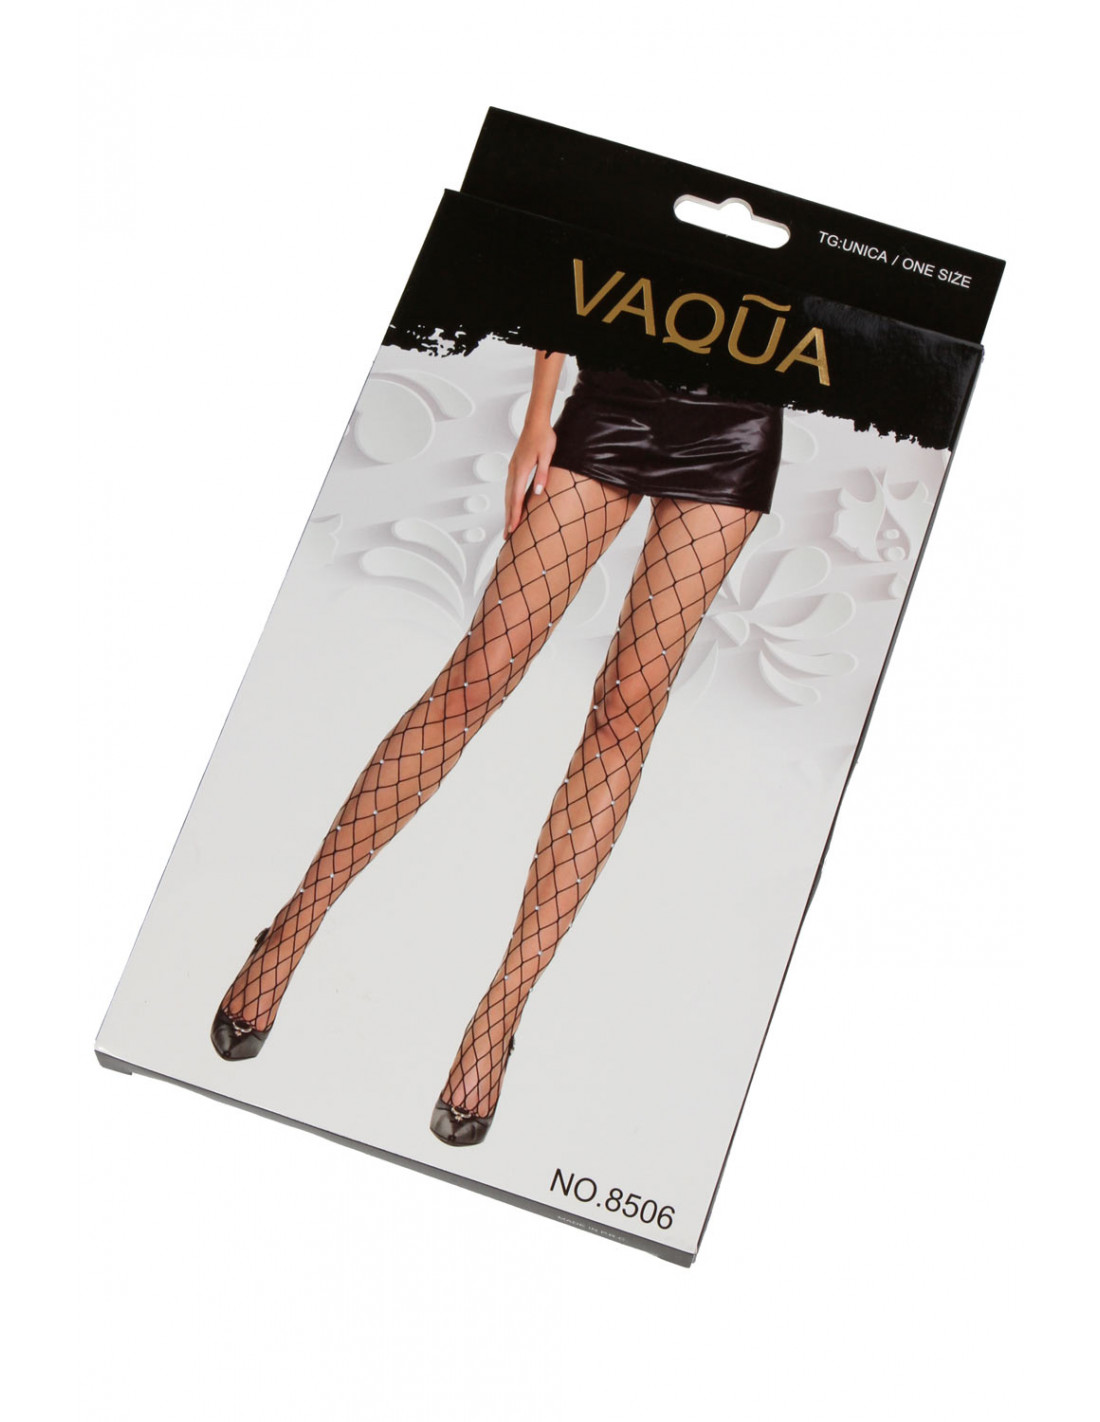 Collants - Resille/Strass